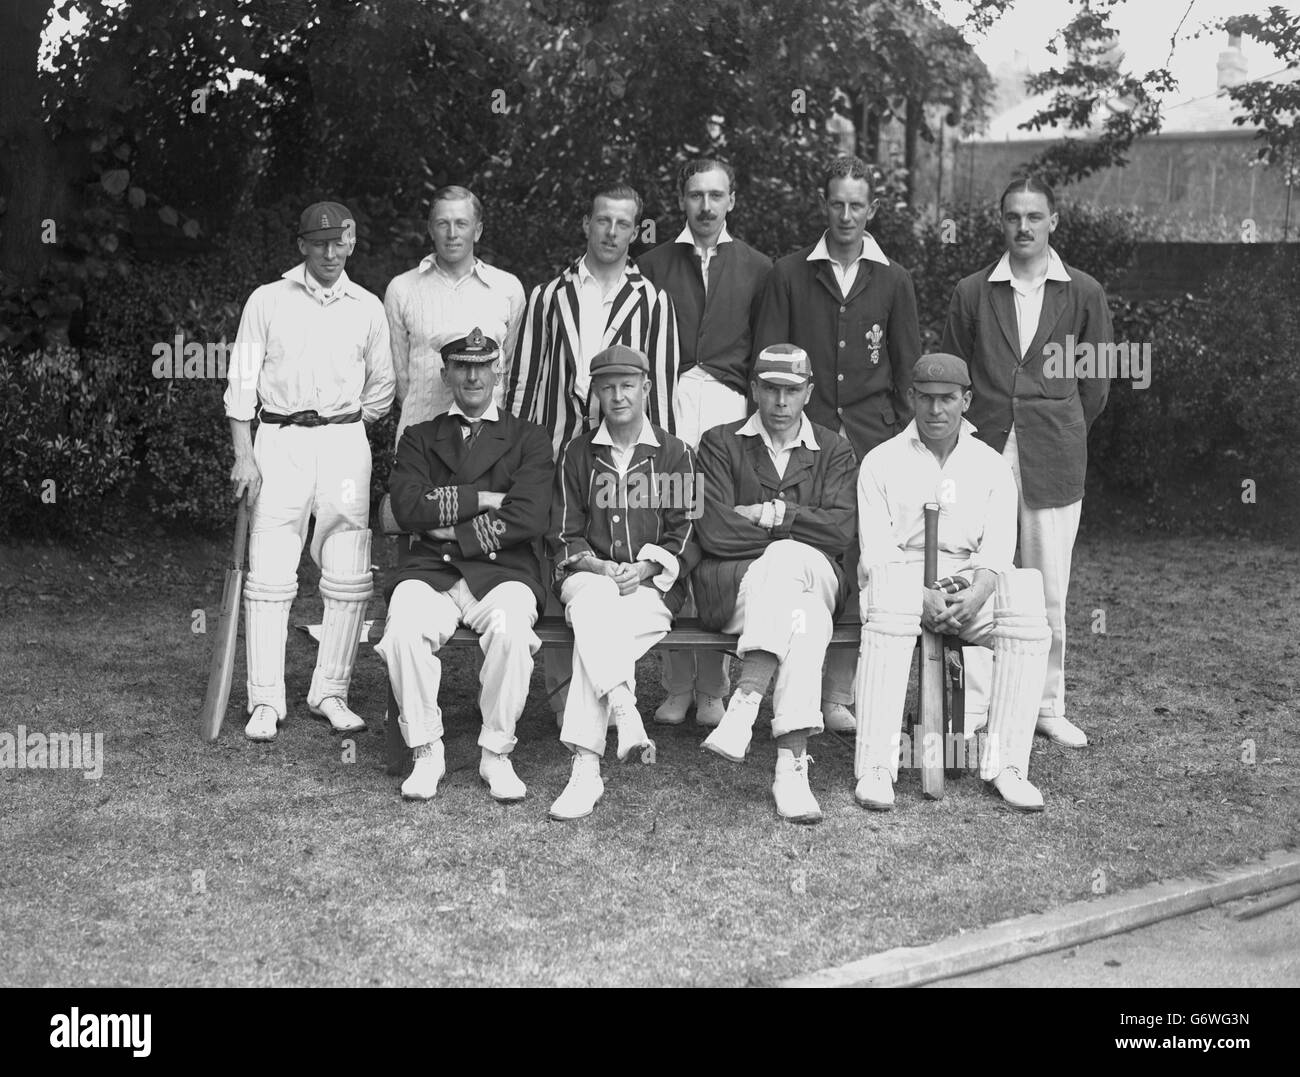 The England XI team to play a one-day charity match against the Dominions at Lord's. The match was played in aid of HM King George's Fund for Sailors. Stock Photo